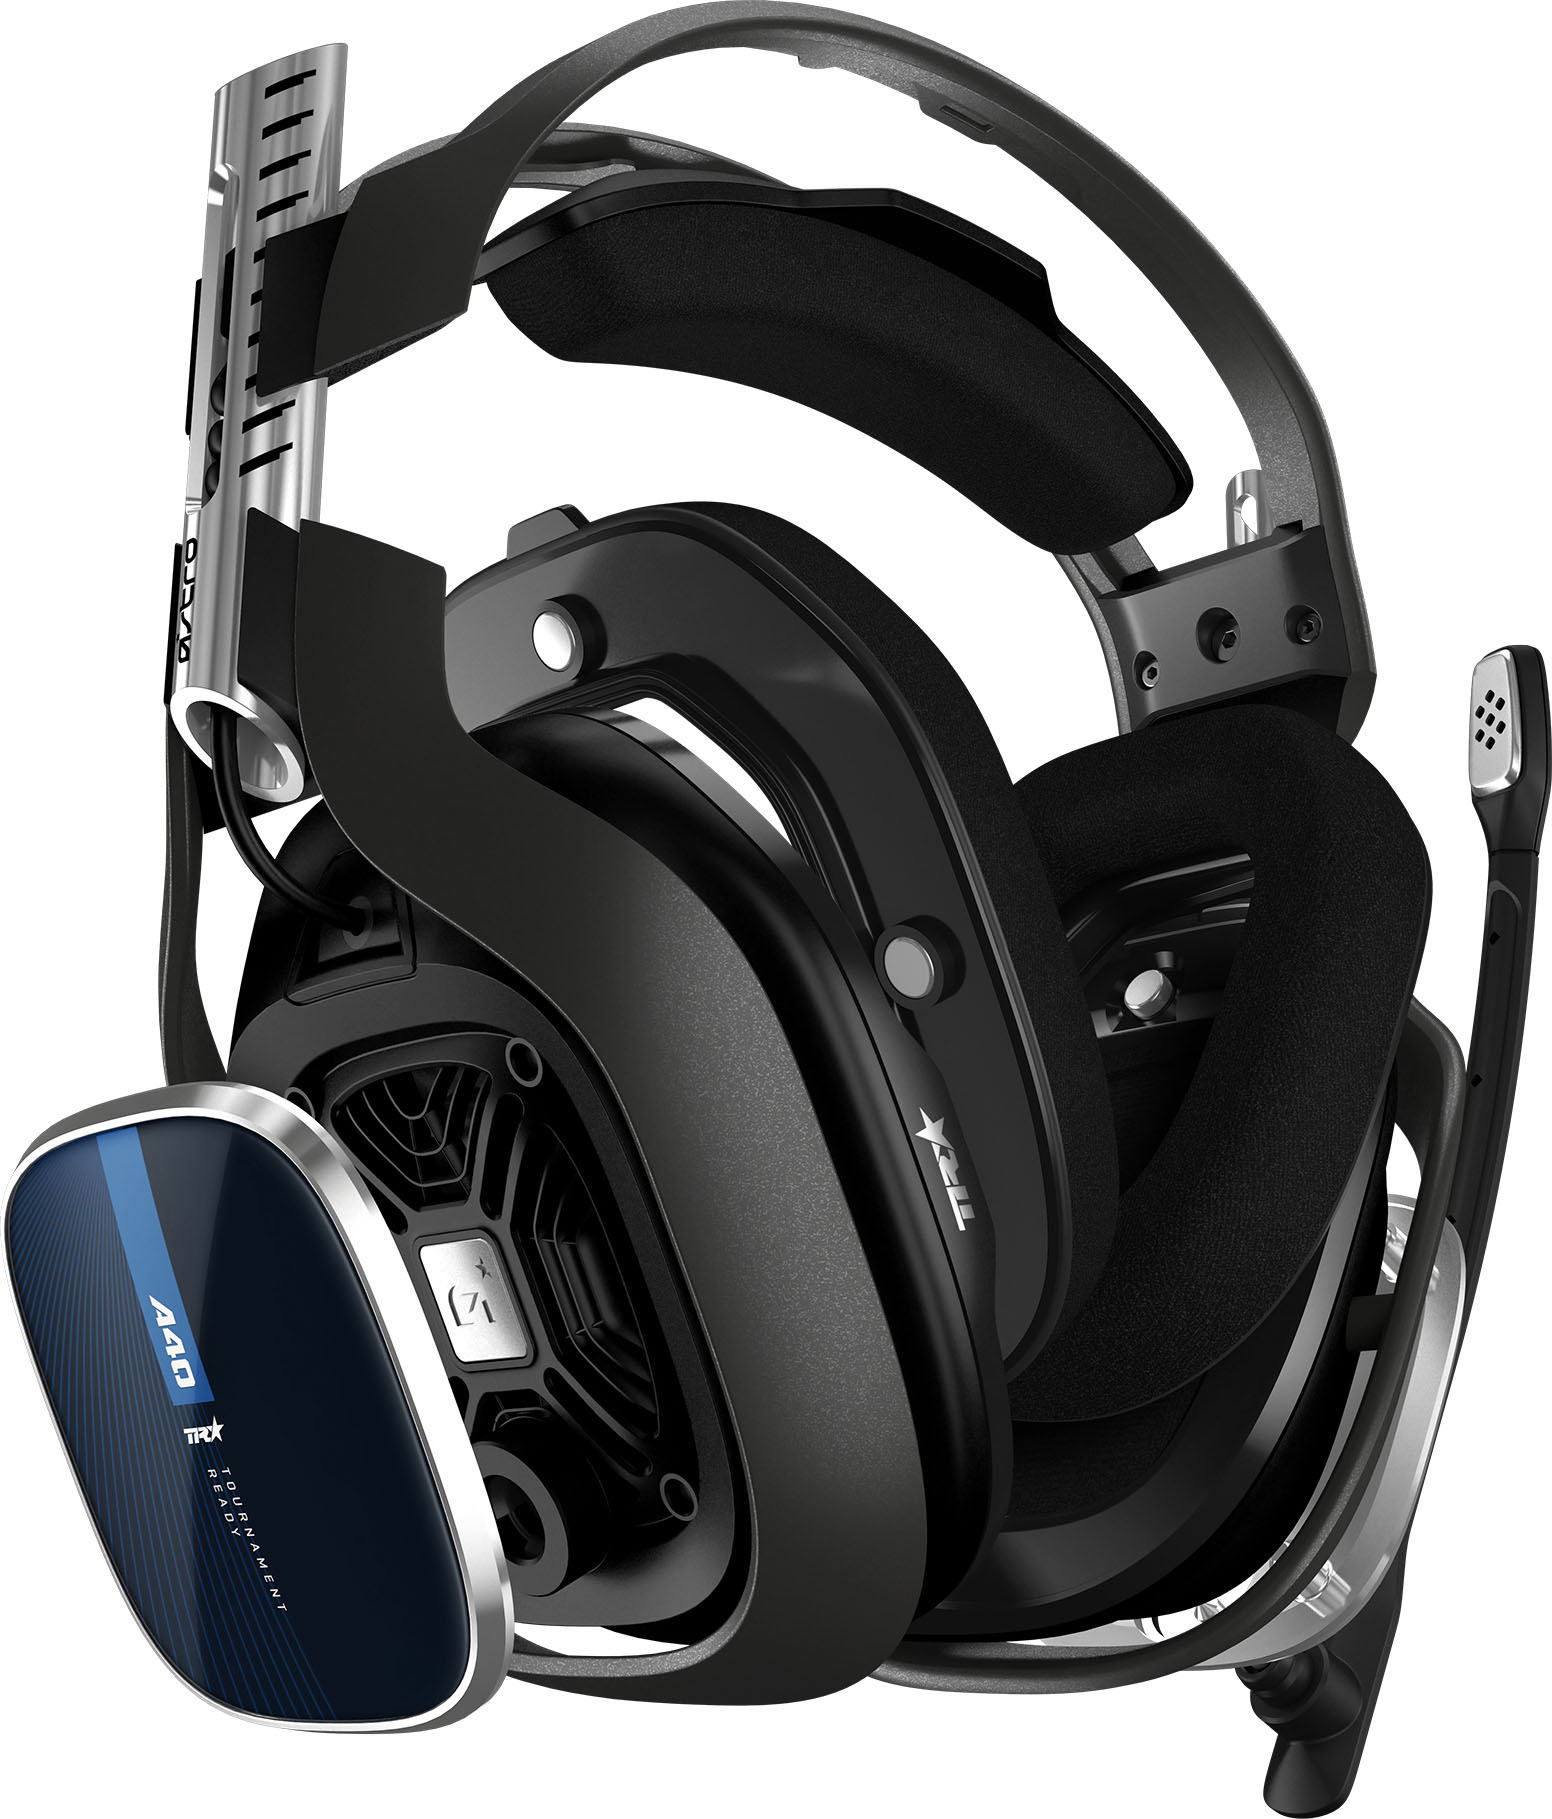 ps4 headset with mixamp